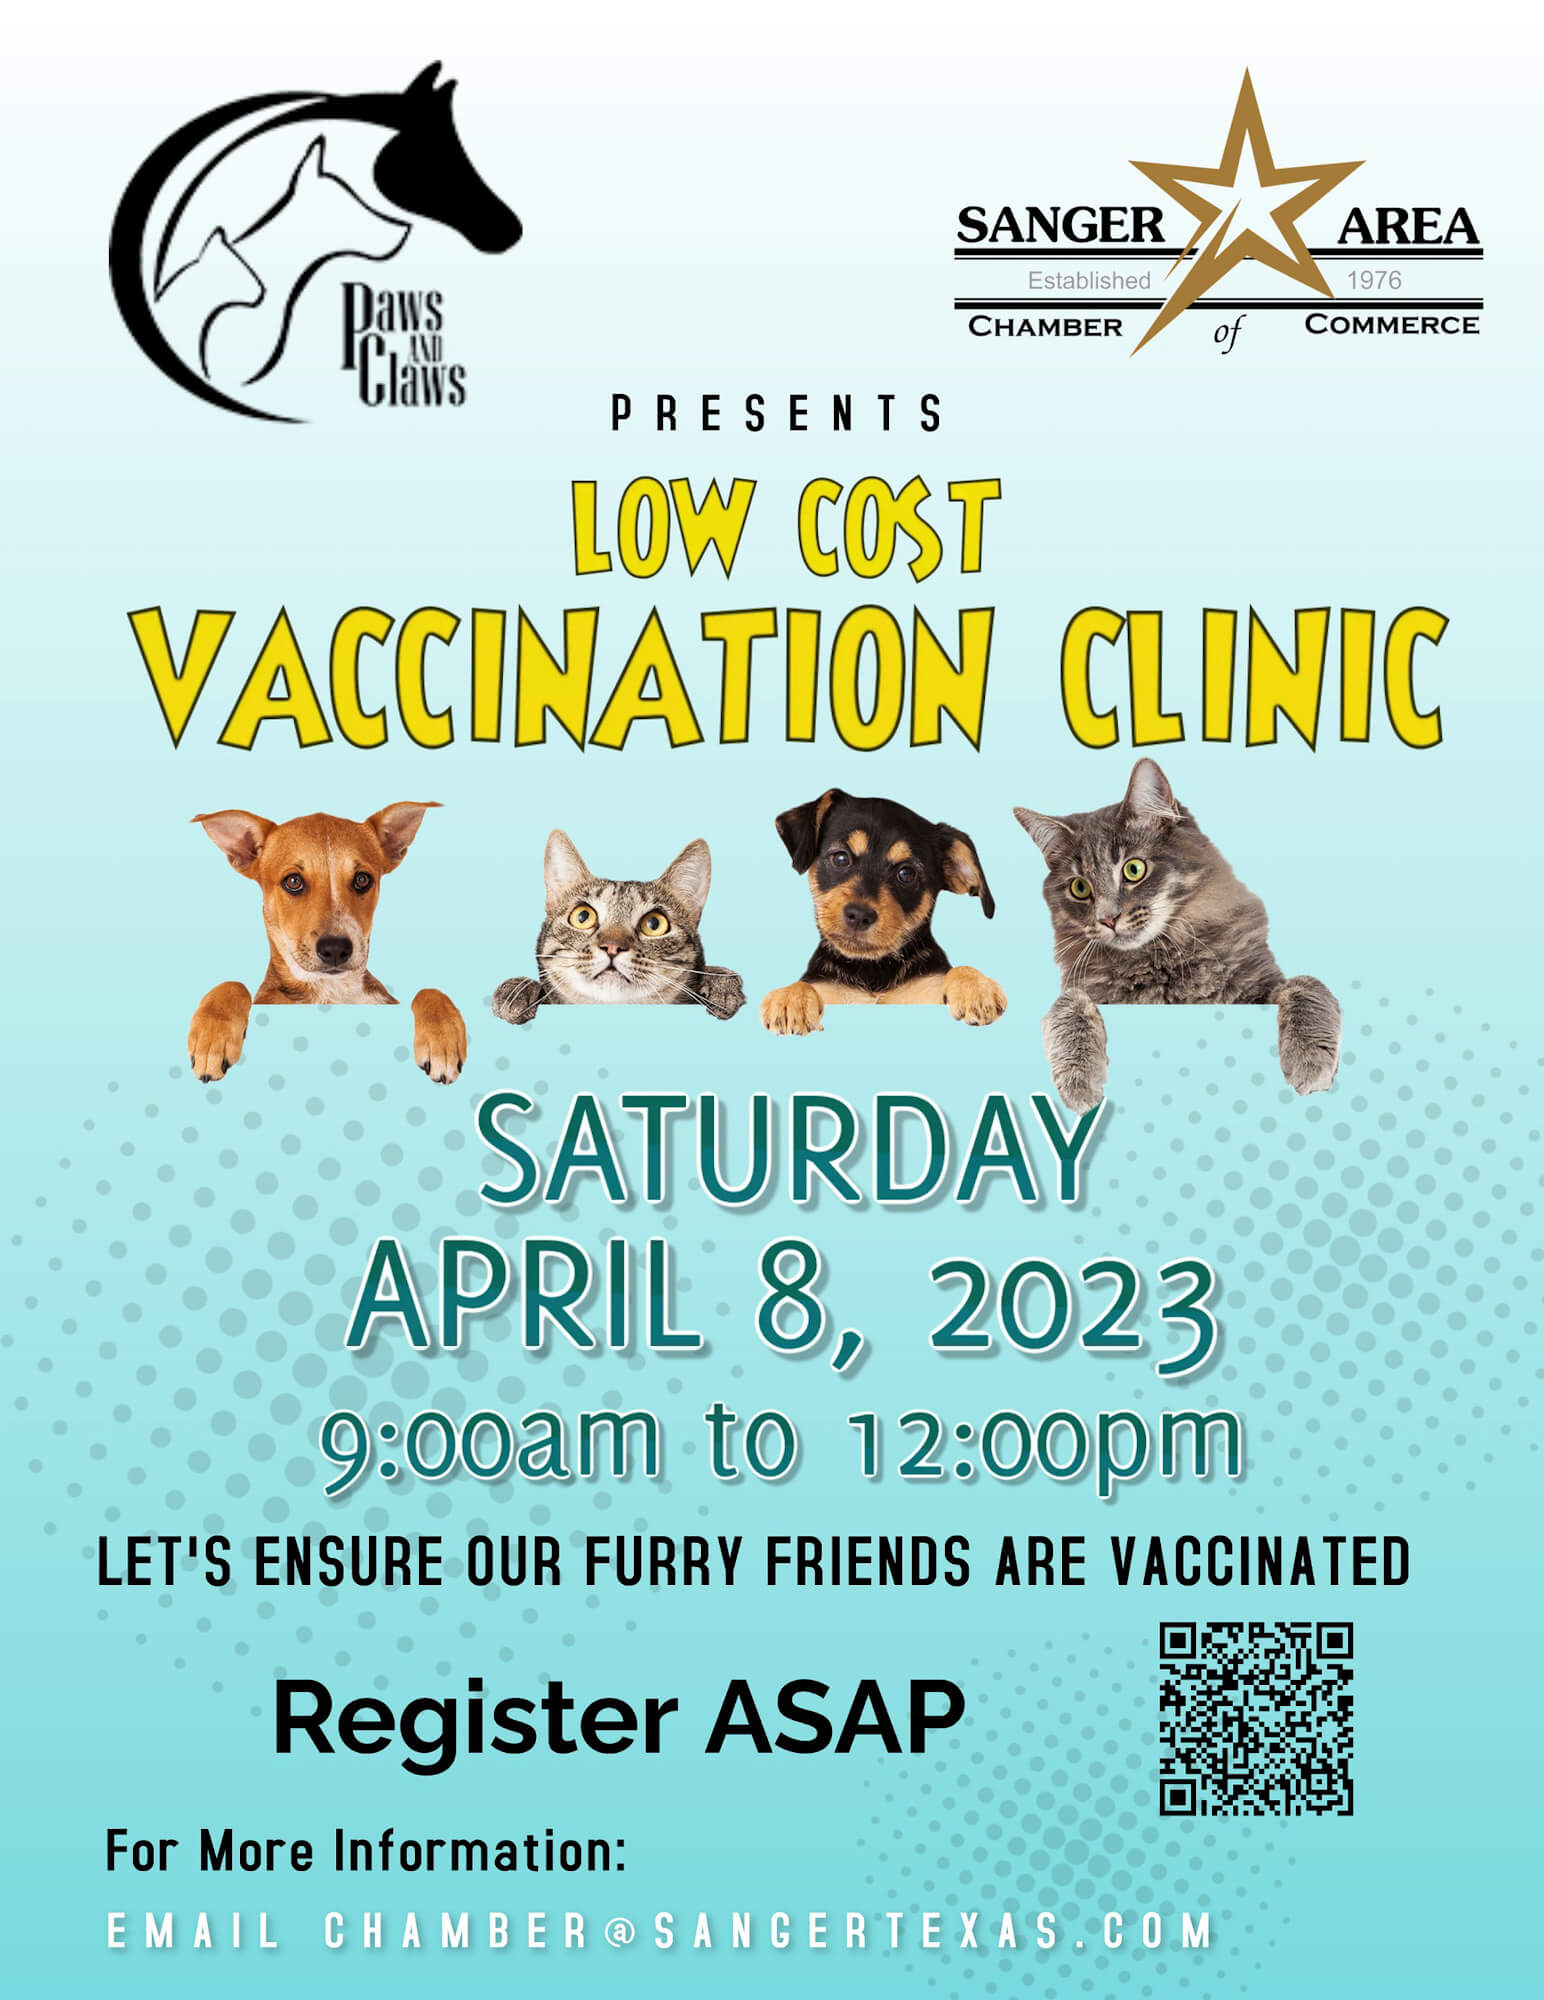 Vaccination Clinic 2560px_edited